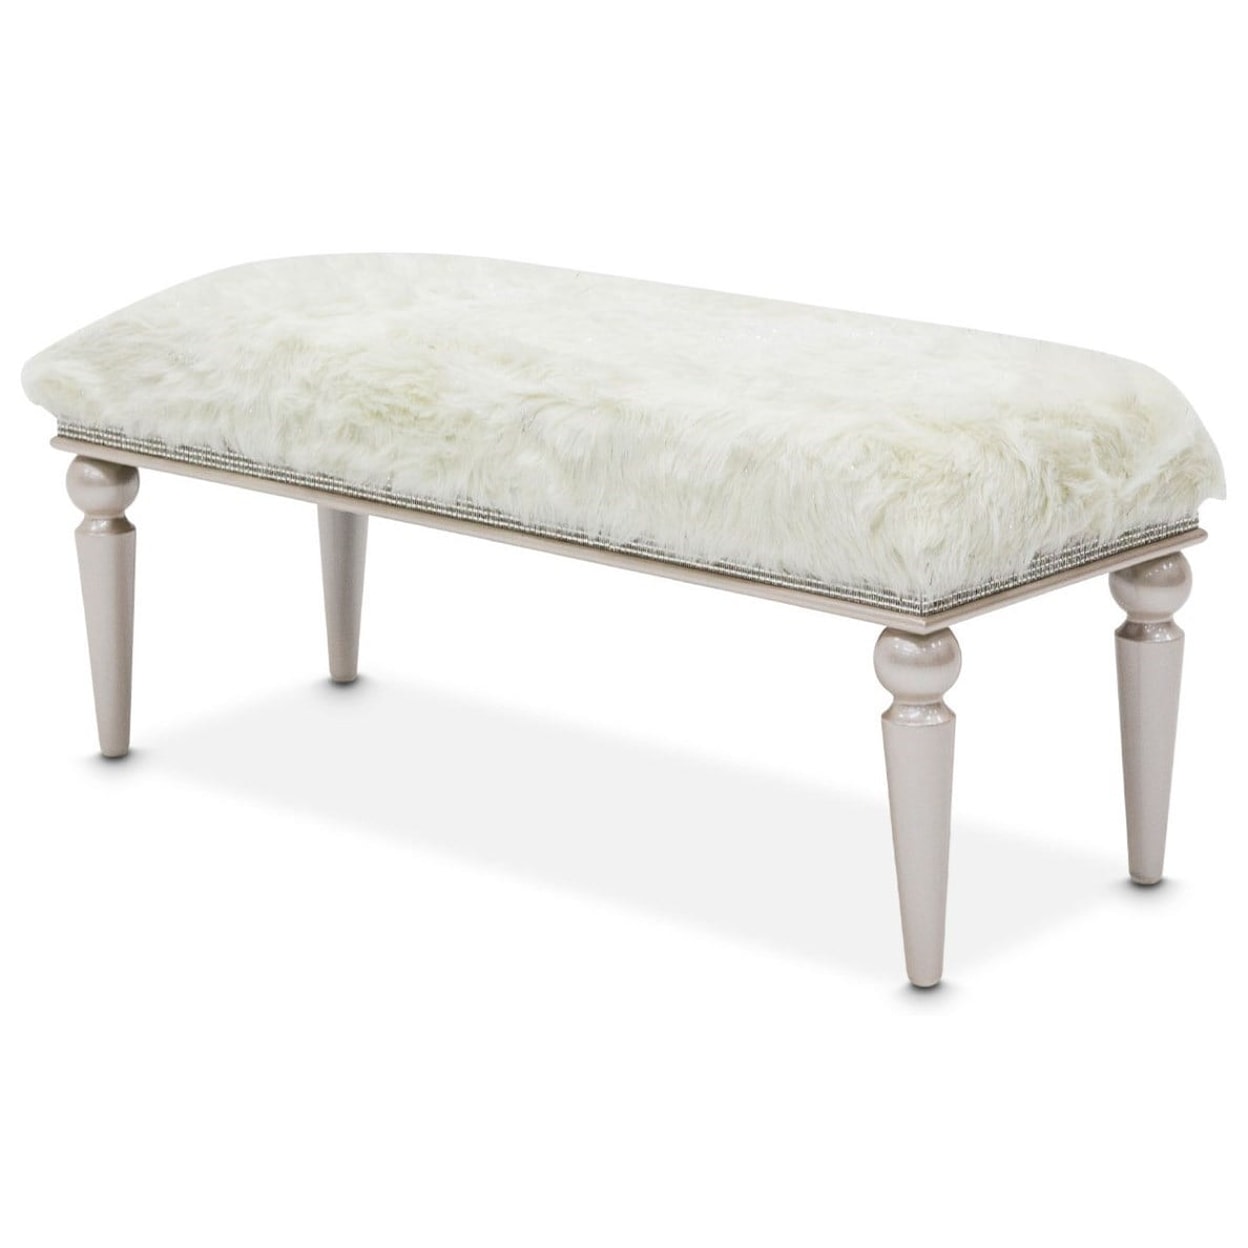 Michael Amini Glimmering Heights Upholstered Rectangular Bench